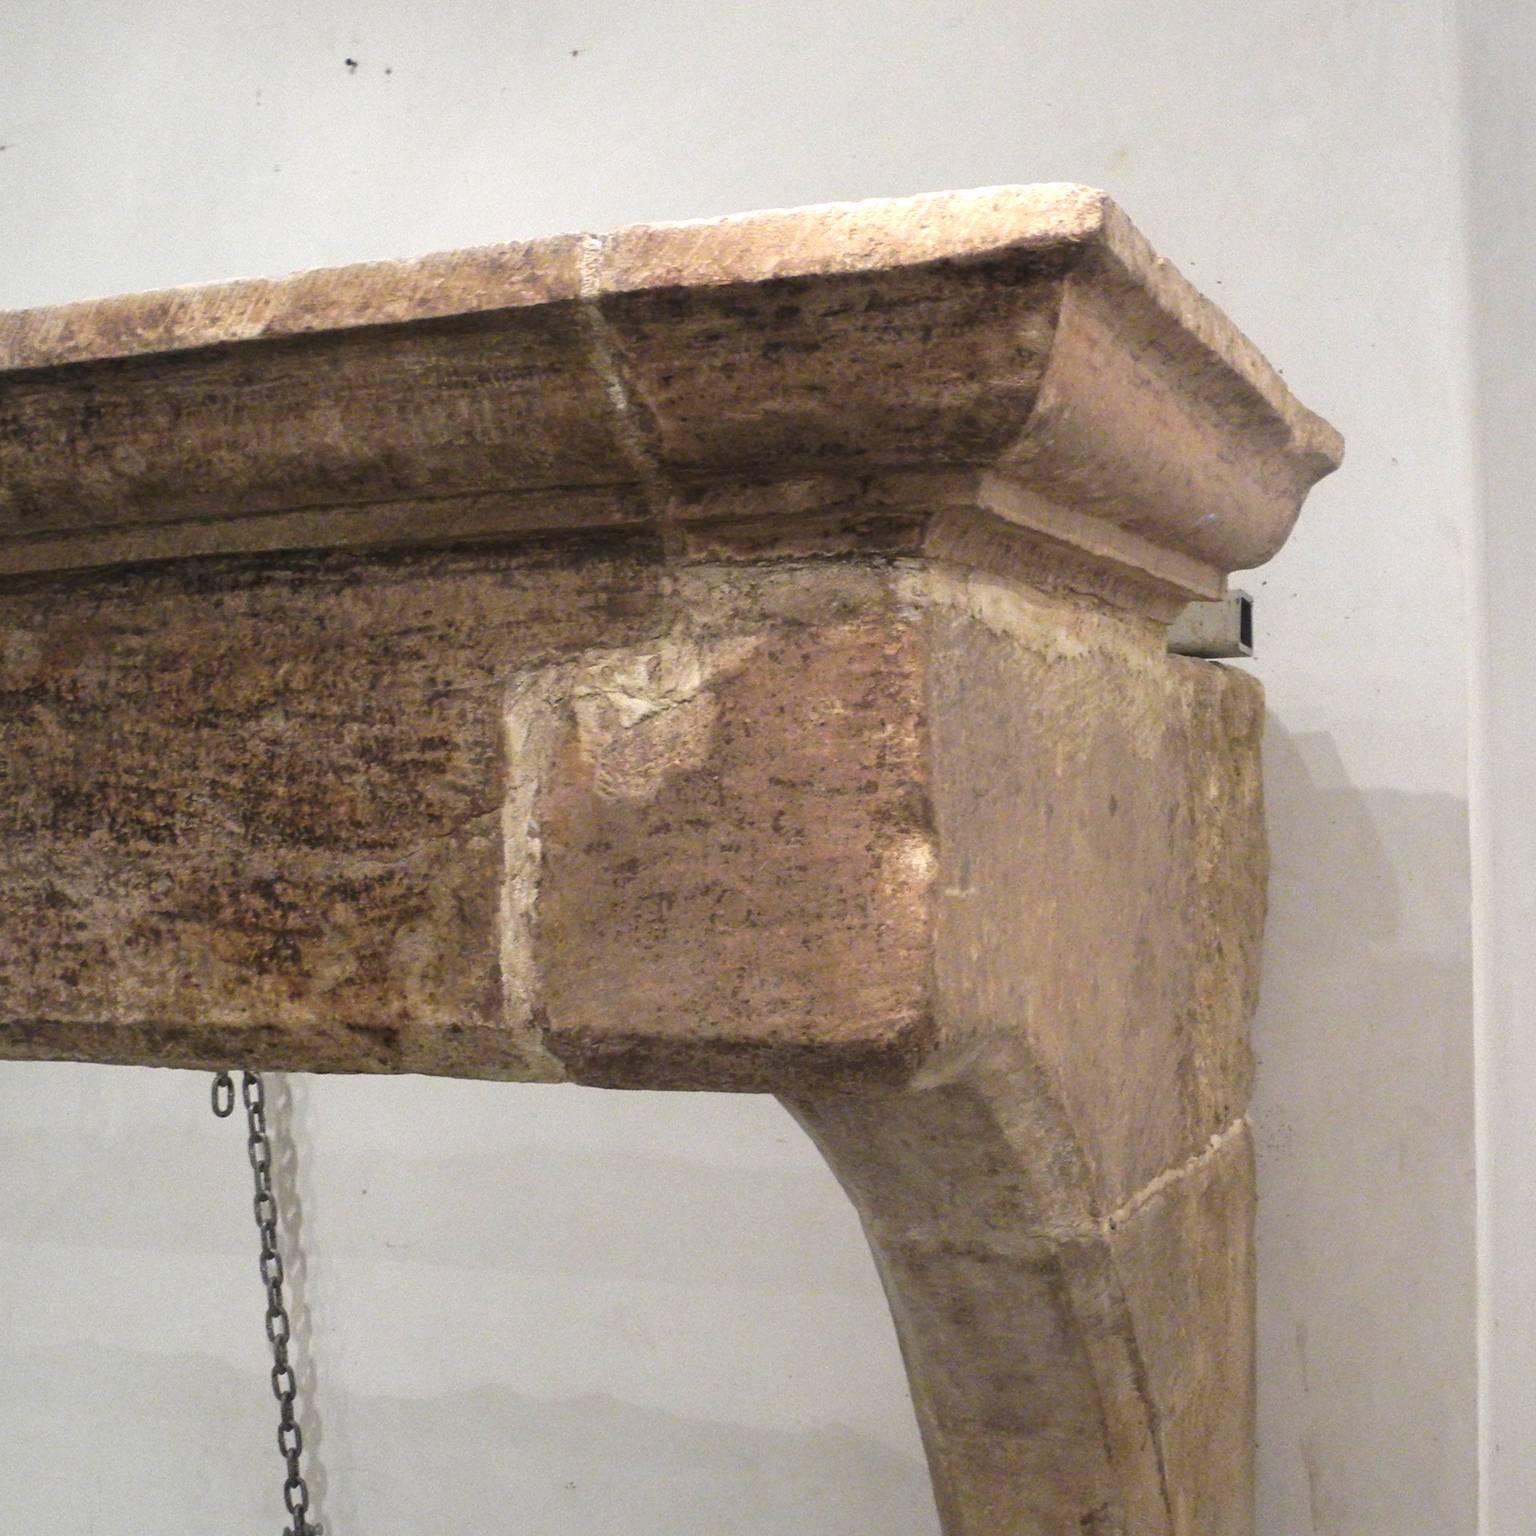 This is a grand fireplace mantel that features carved legs and lintel. It is from the 18th century from Ainsi, a town on the French-Swiss border. Due it its size, it is a great centerpiece for any room, or great atop a stove.